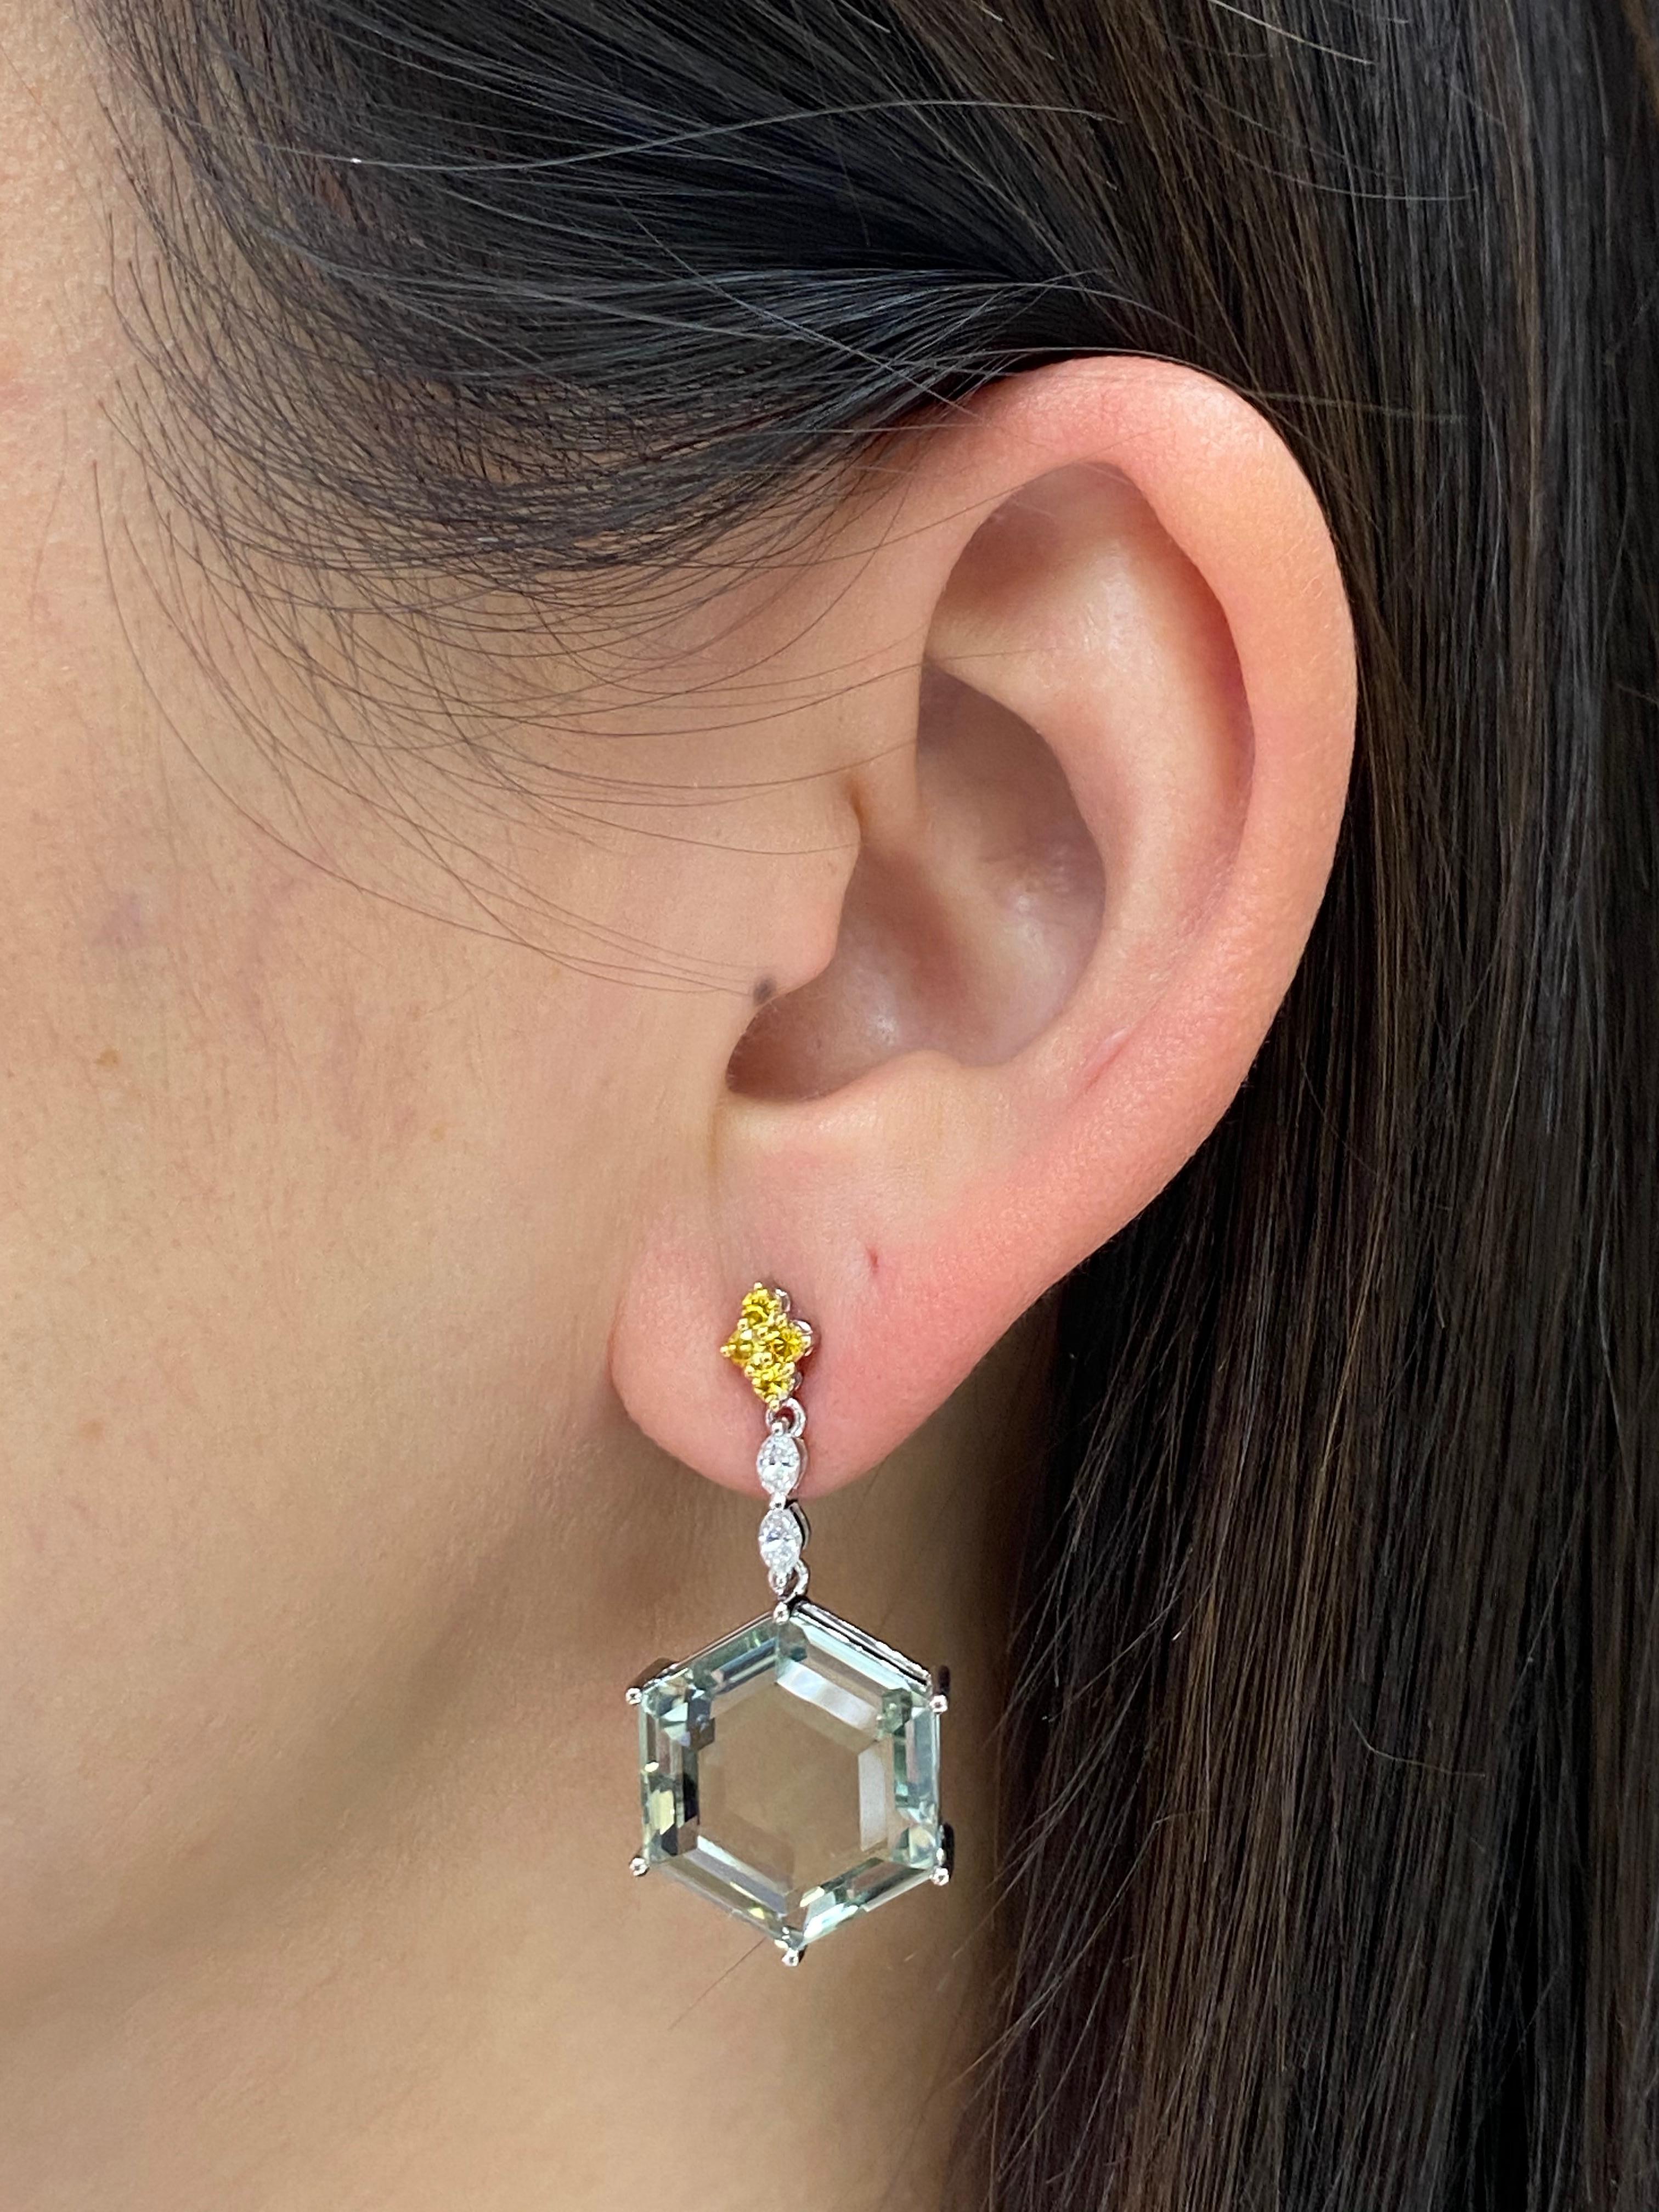 This is a statement piece! Here is a very special pair of drop earrings. The design is superb. The earrings are set in 18k white gold, Starting form the top are 0.30 cts of fancy vivid yellow diamonds followed by 0.28 cts of marquis diamonds. At the